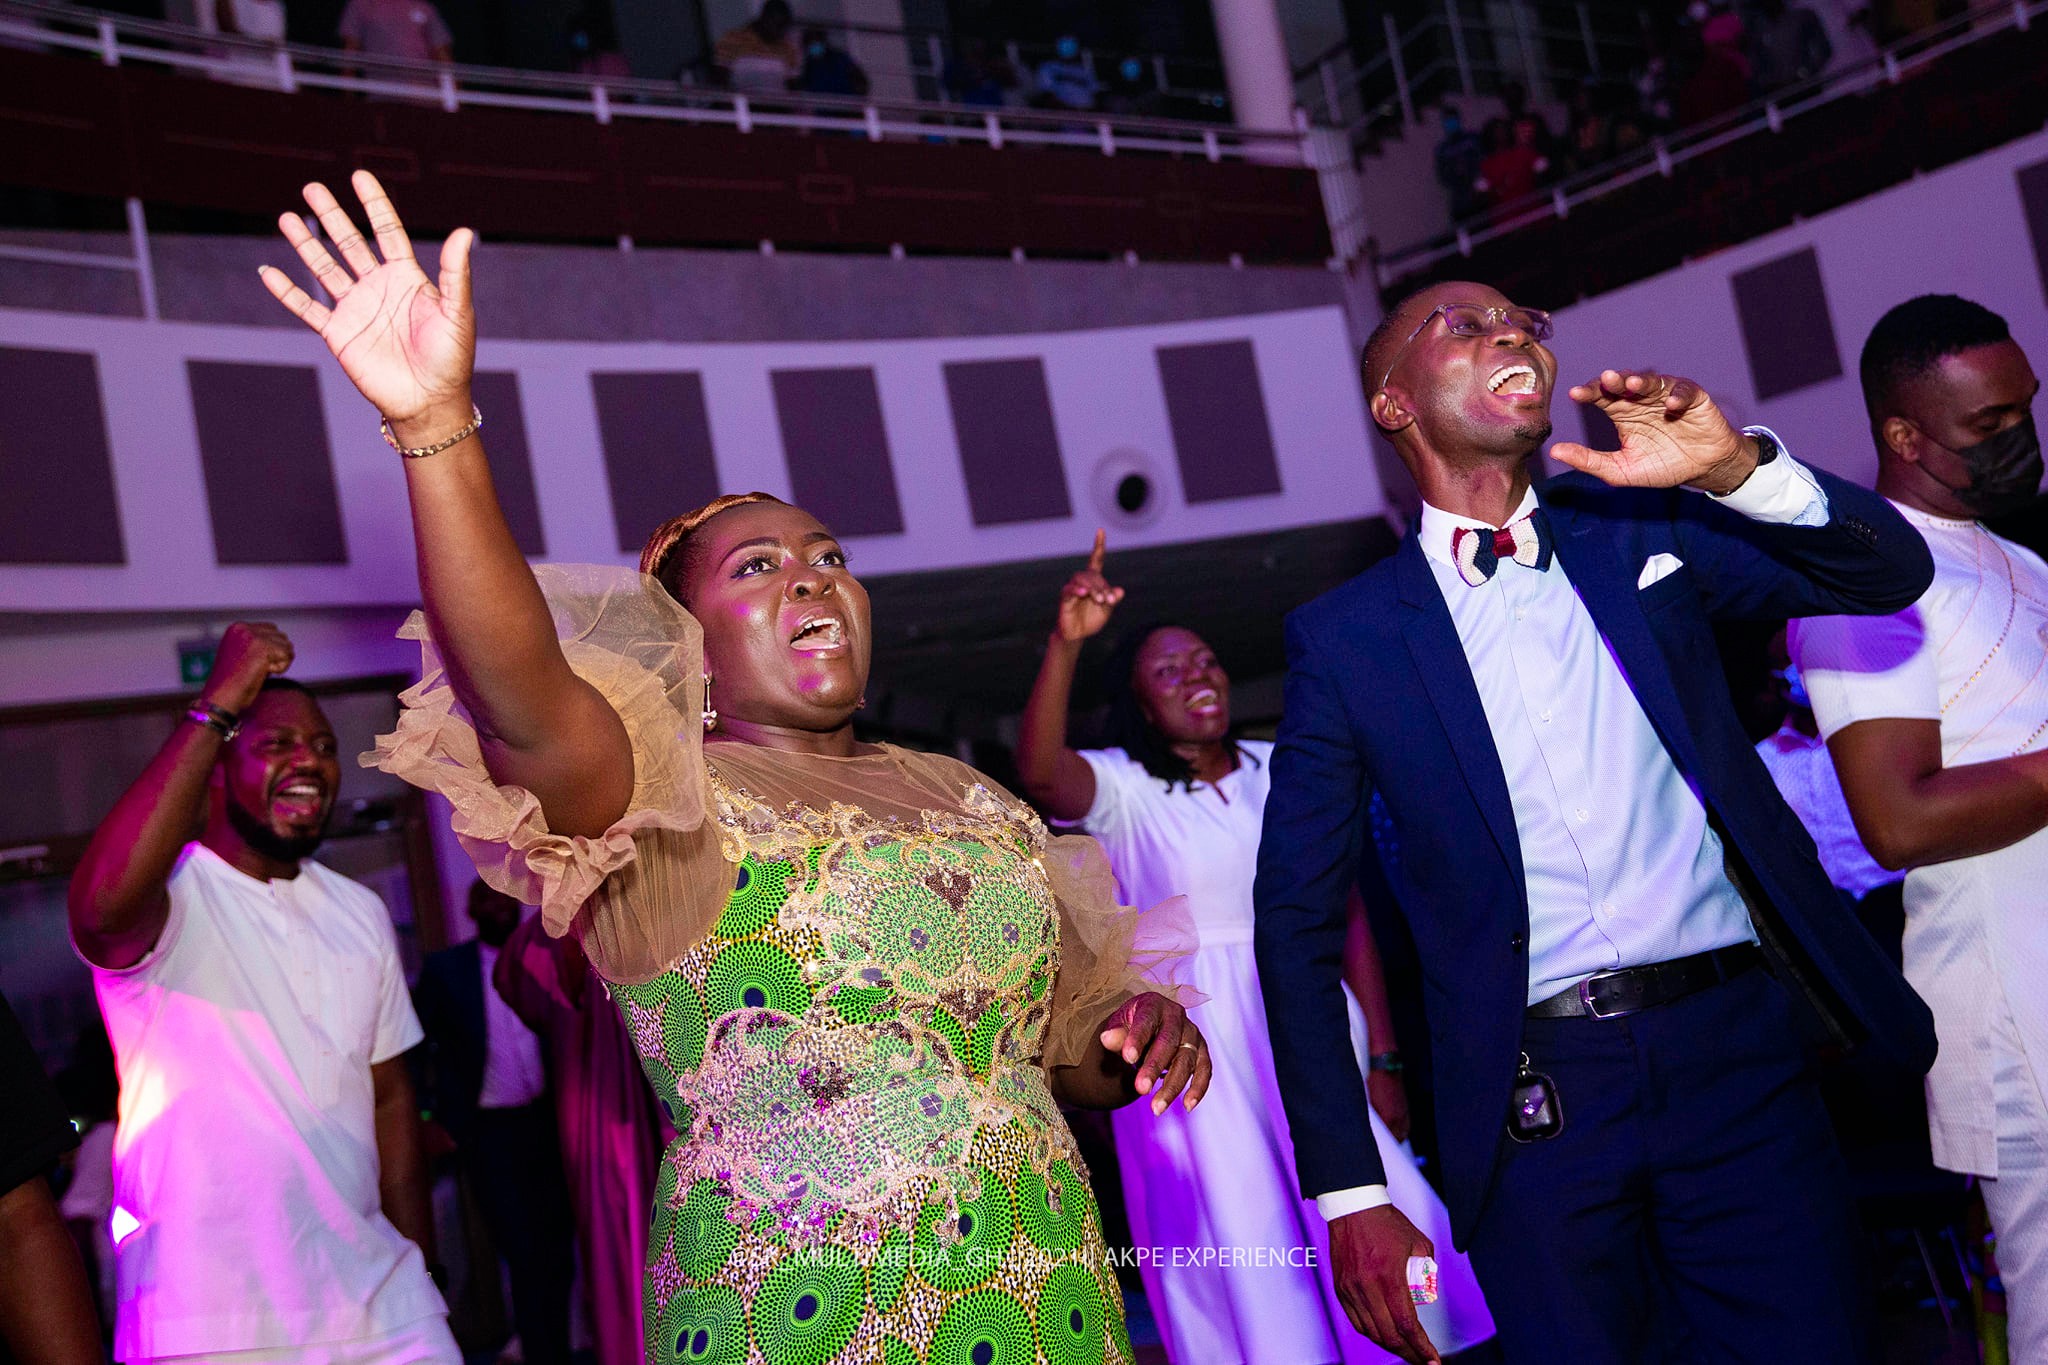 Event Review: 4 reasons why Bethel Revival Choir's Akpe Experience concert was epic